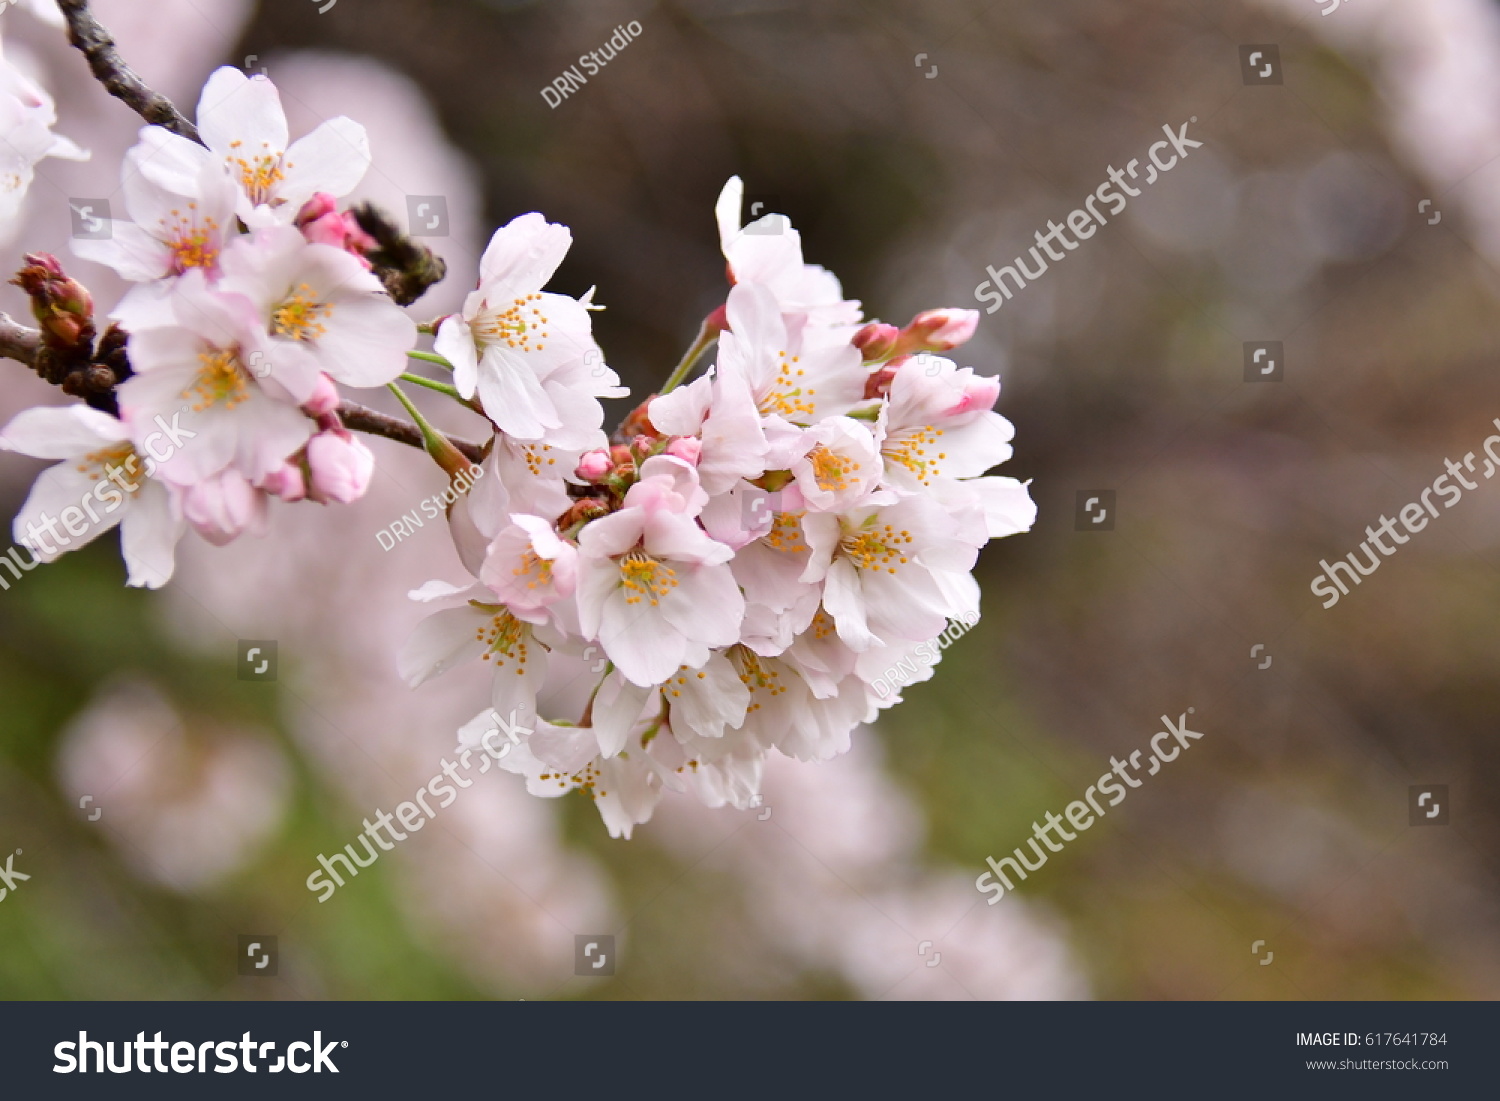 Beautiful background of pink flowers cherry blossom or sakura flower with Morning fog faded. #617641784